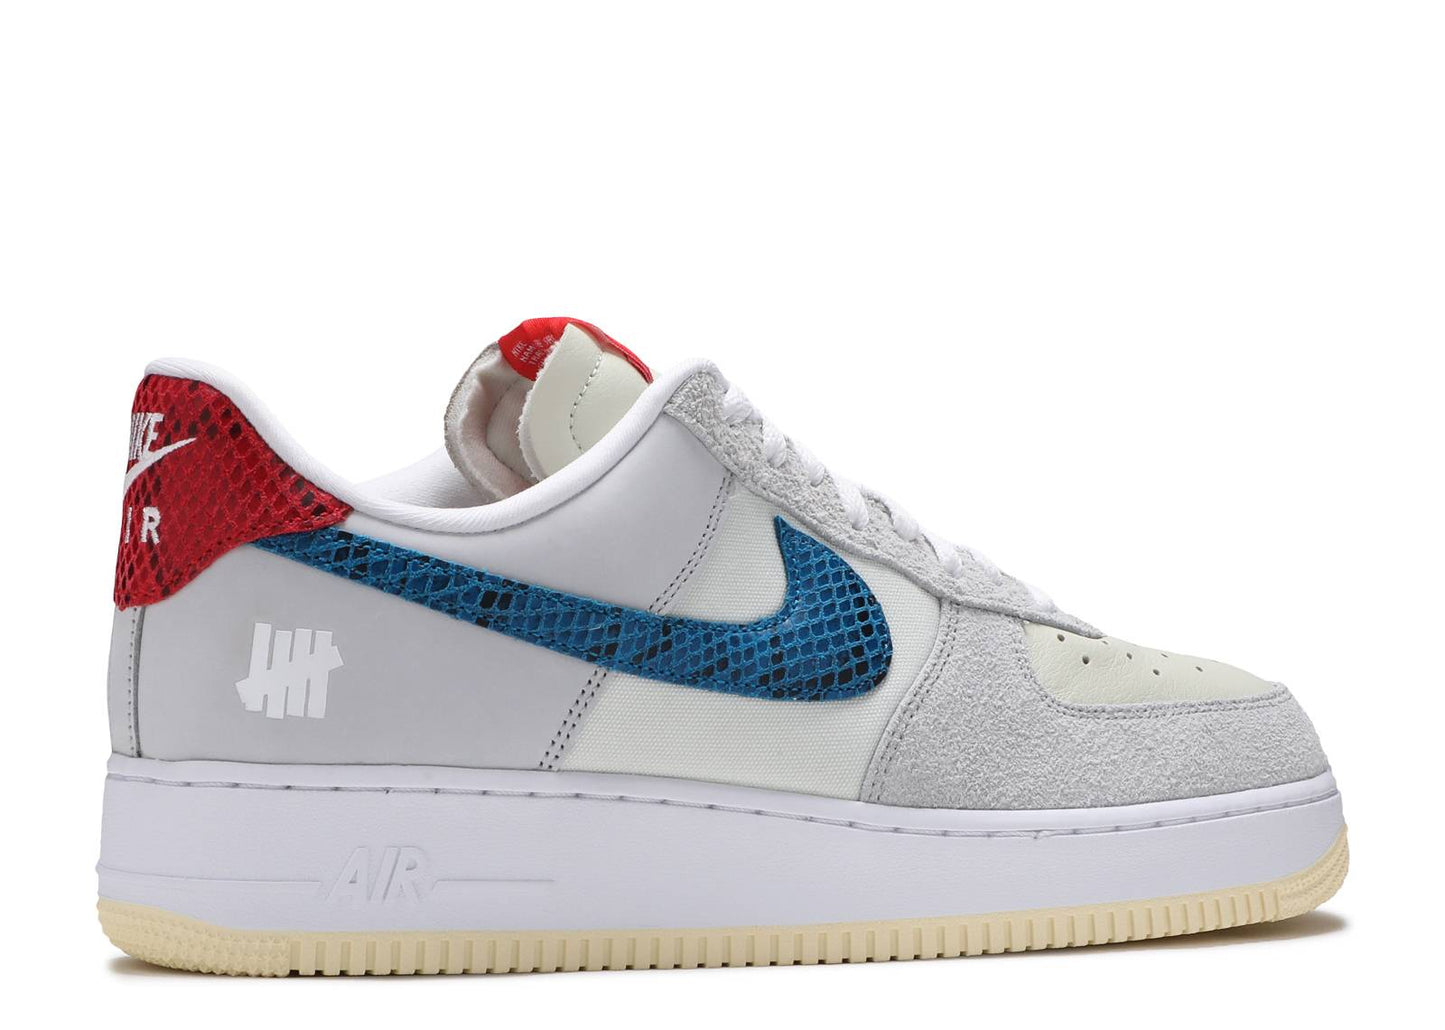 Undefeated x Nike Air Force 1 Low "5 On It White"